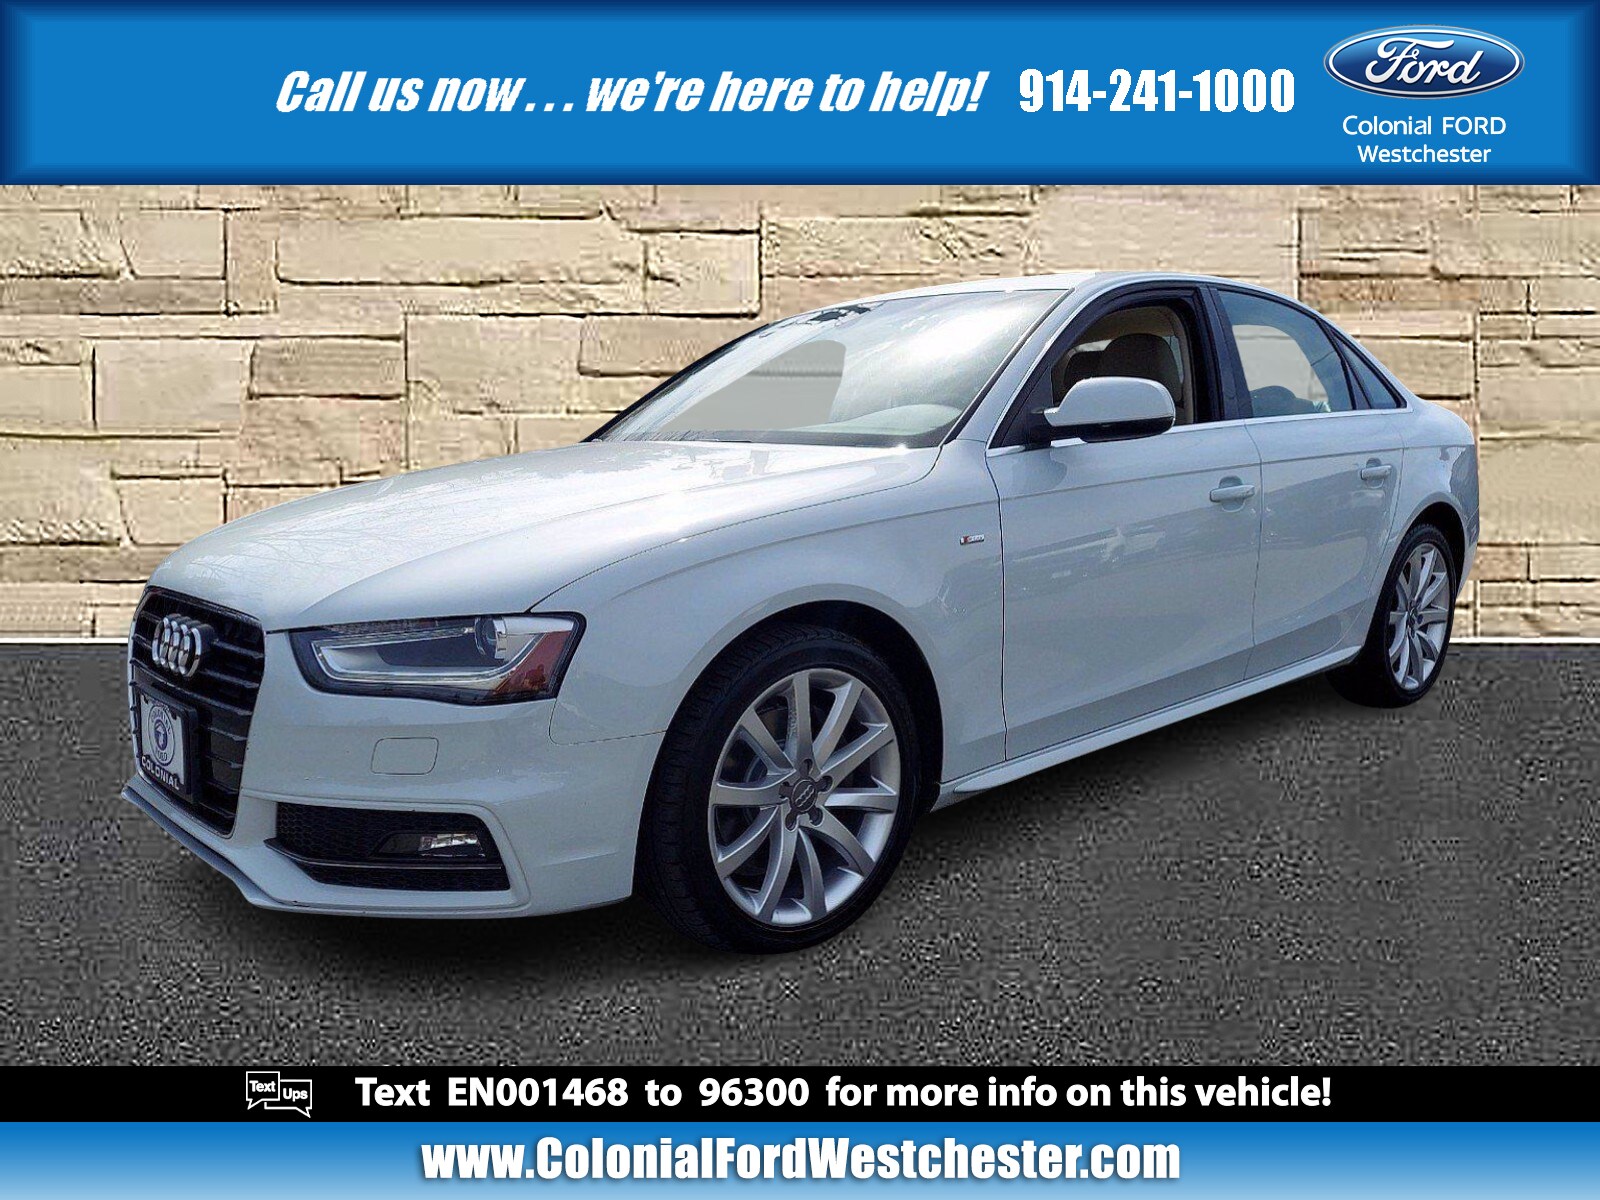 Used Audi A4 Bedford Hills Ny